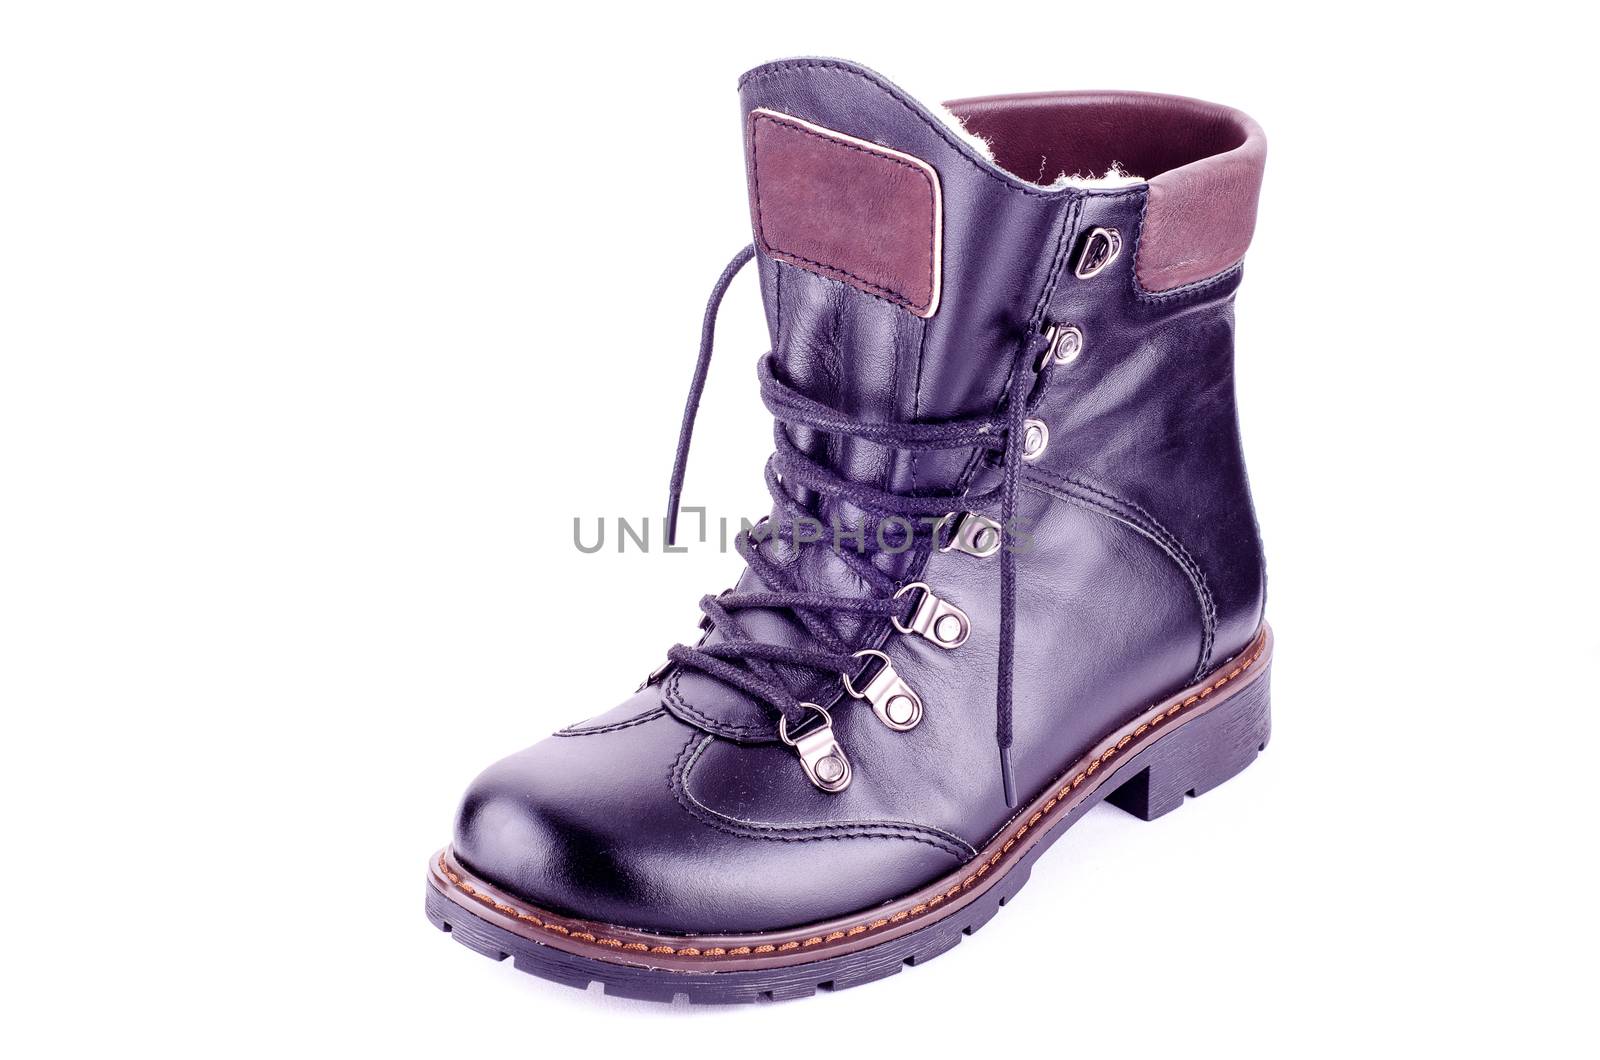 Womens leather boots in black on a white background